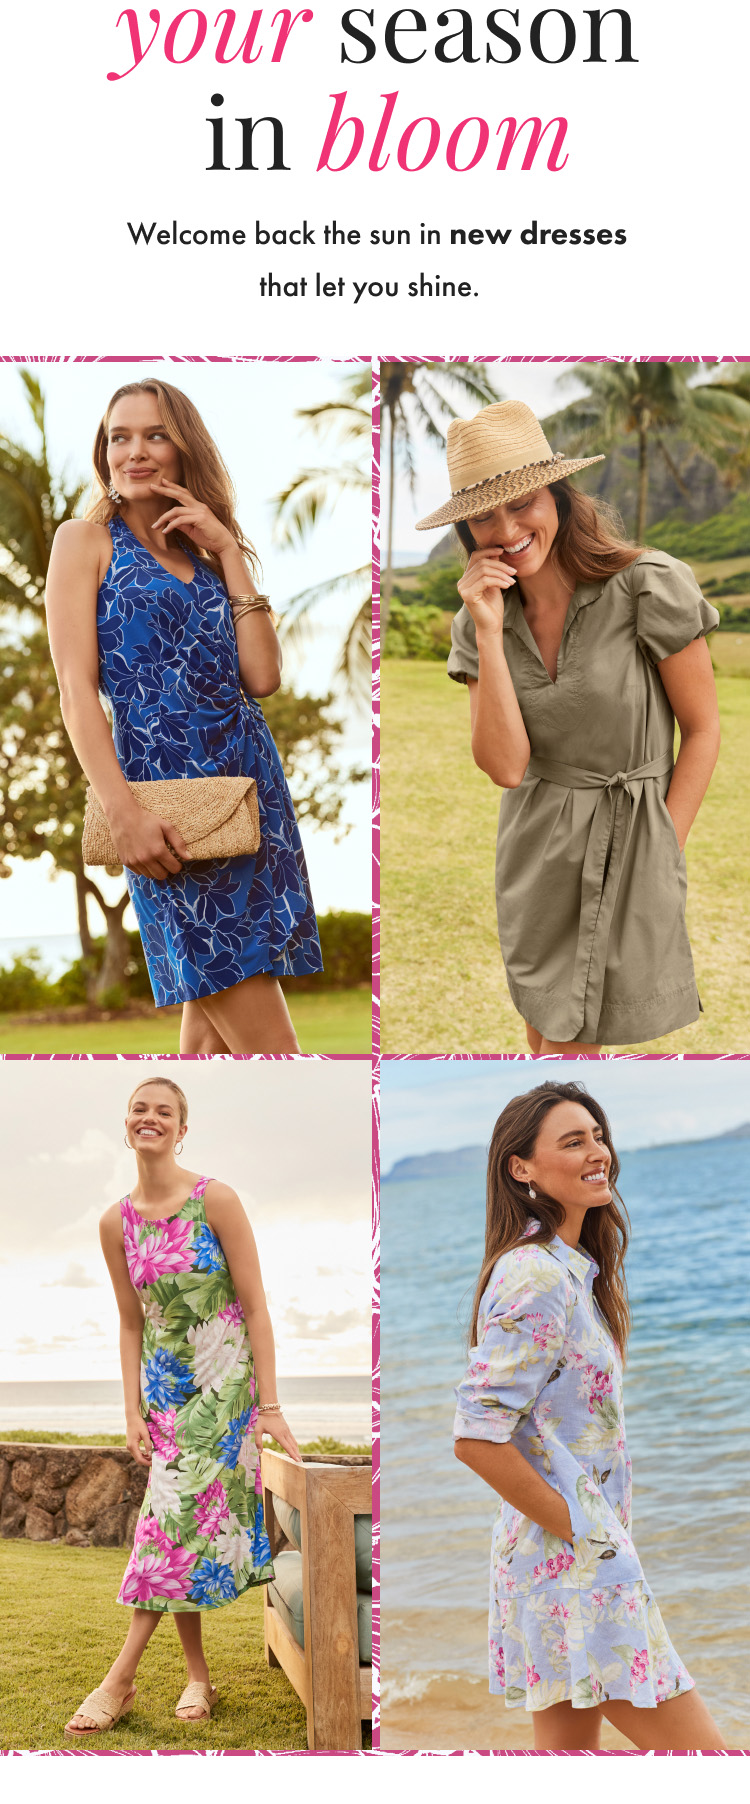 Your Season in Bloom - New Dresses